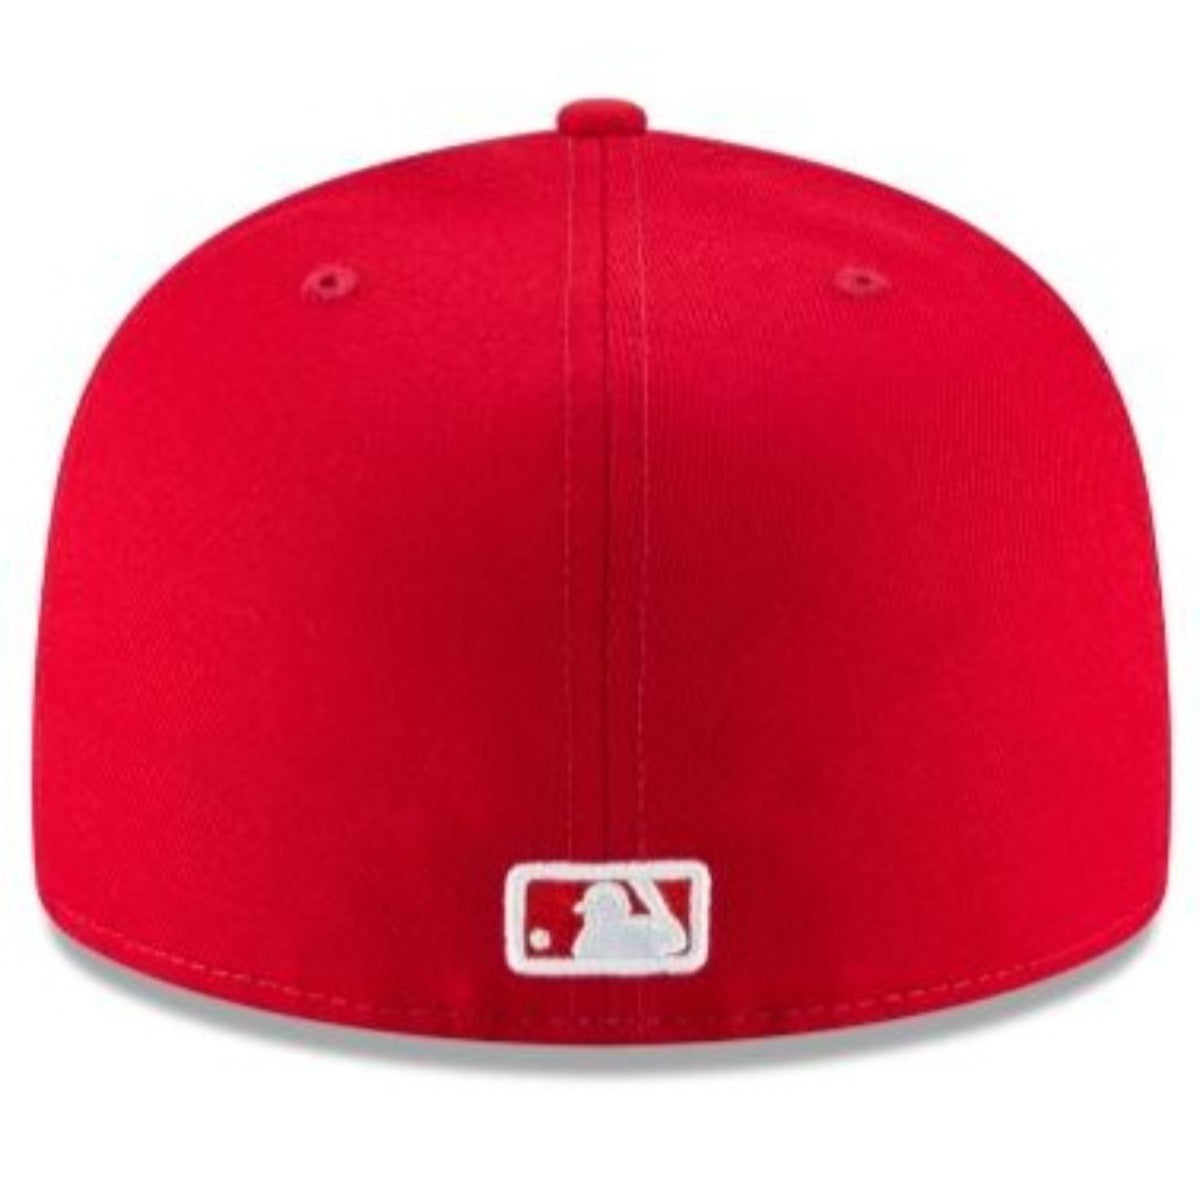 Los Angeles Dodgers 59FIFTY FITTED- Scarlet Nvsoccer.com Thecoliseum